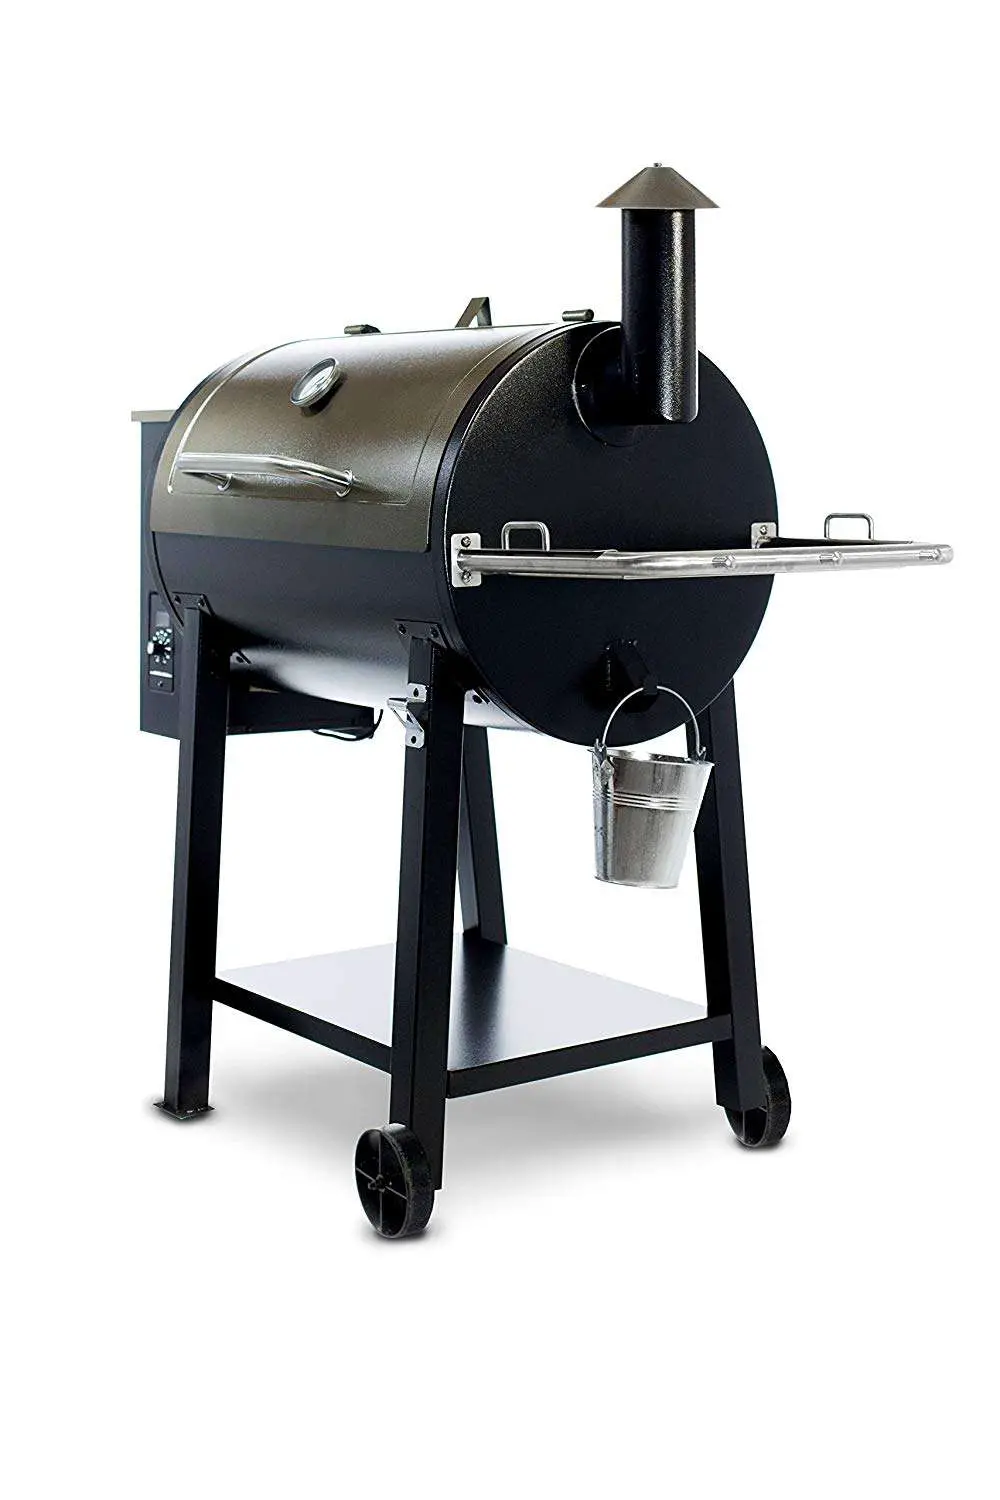 New Louisiana Grills Pit Boss Grills 72820 Deluxe Wood ...